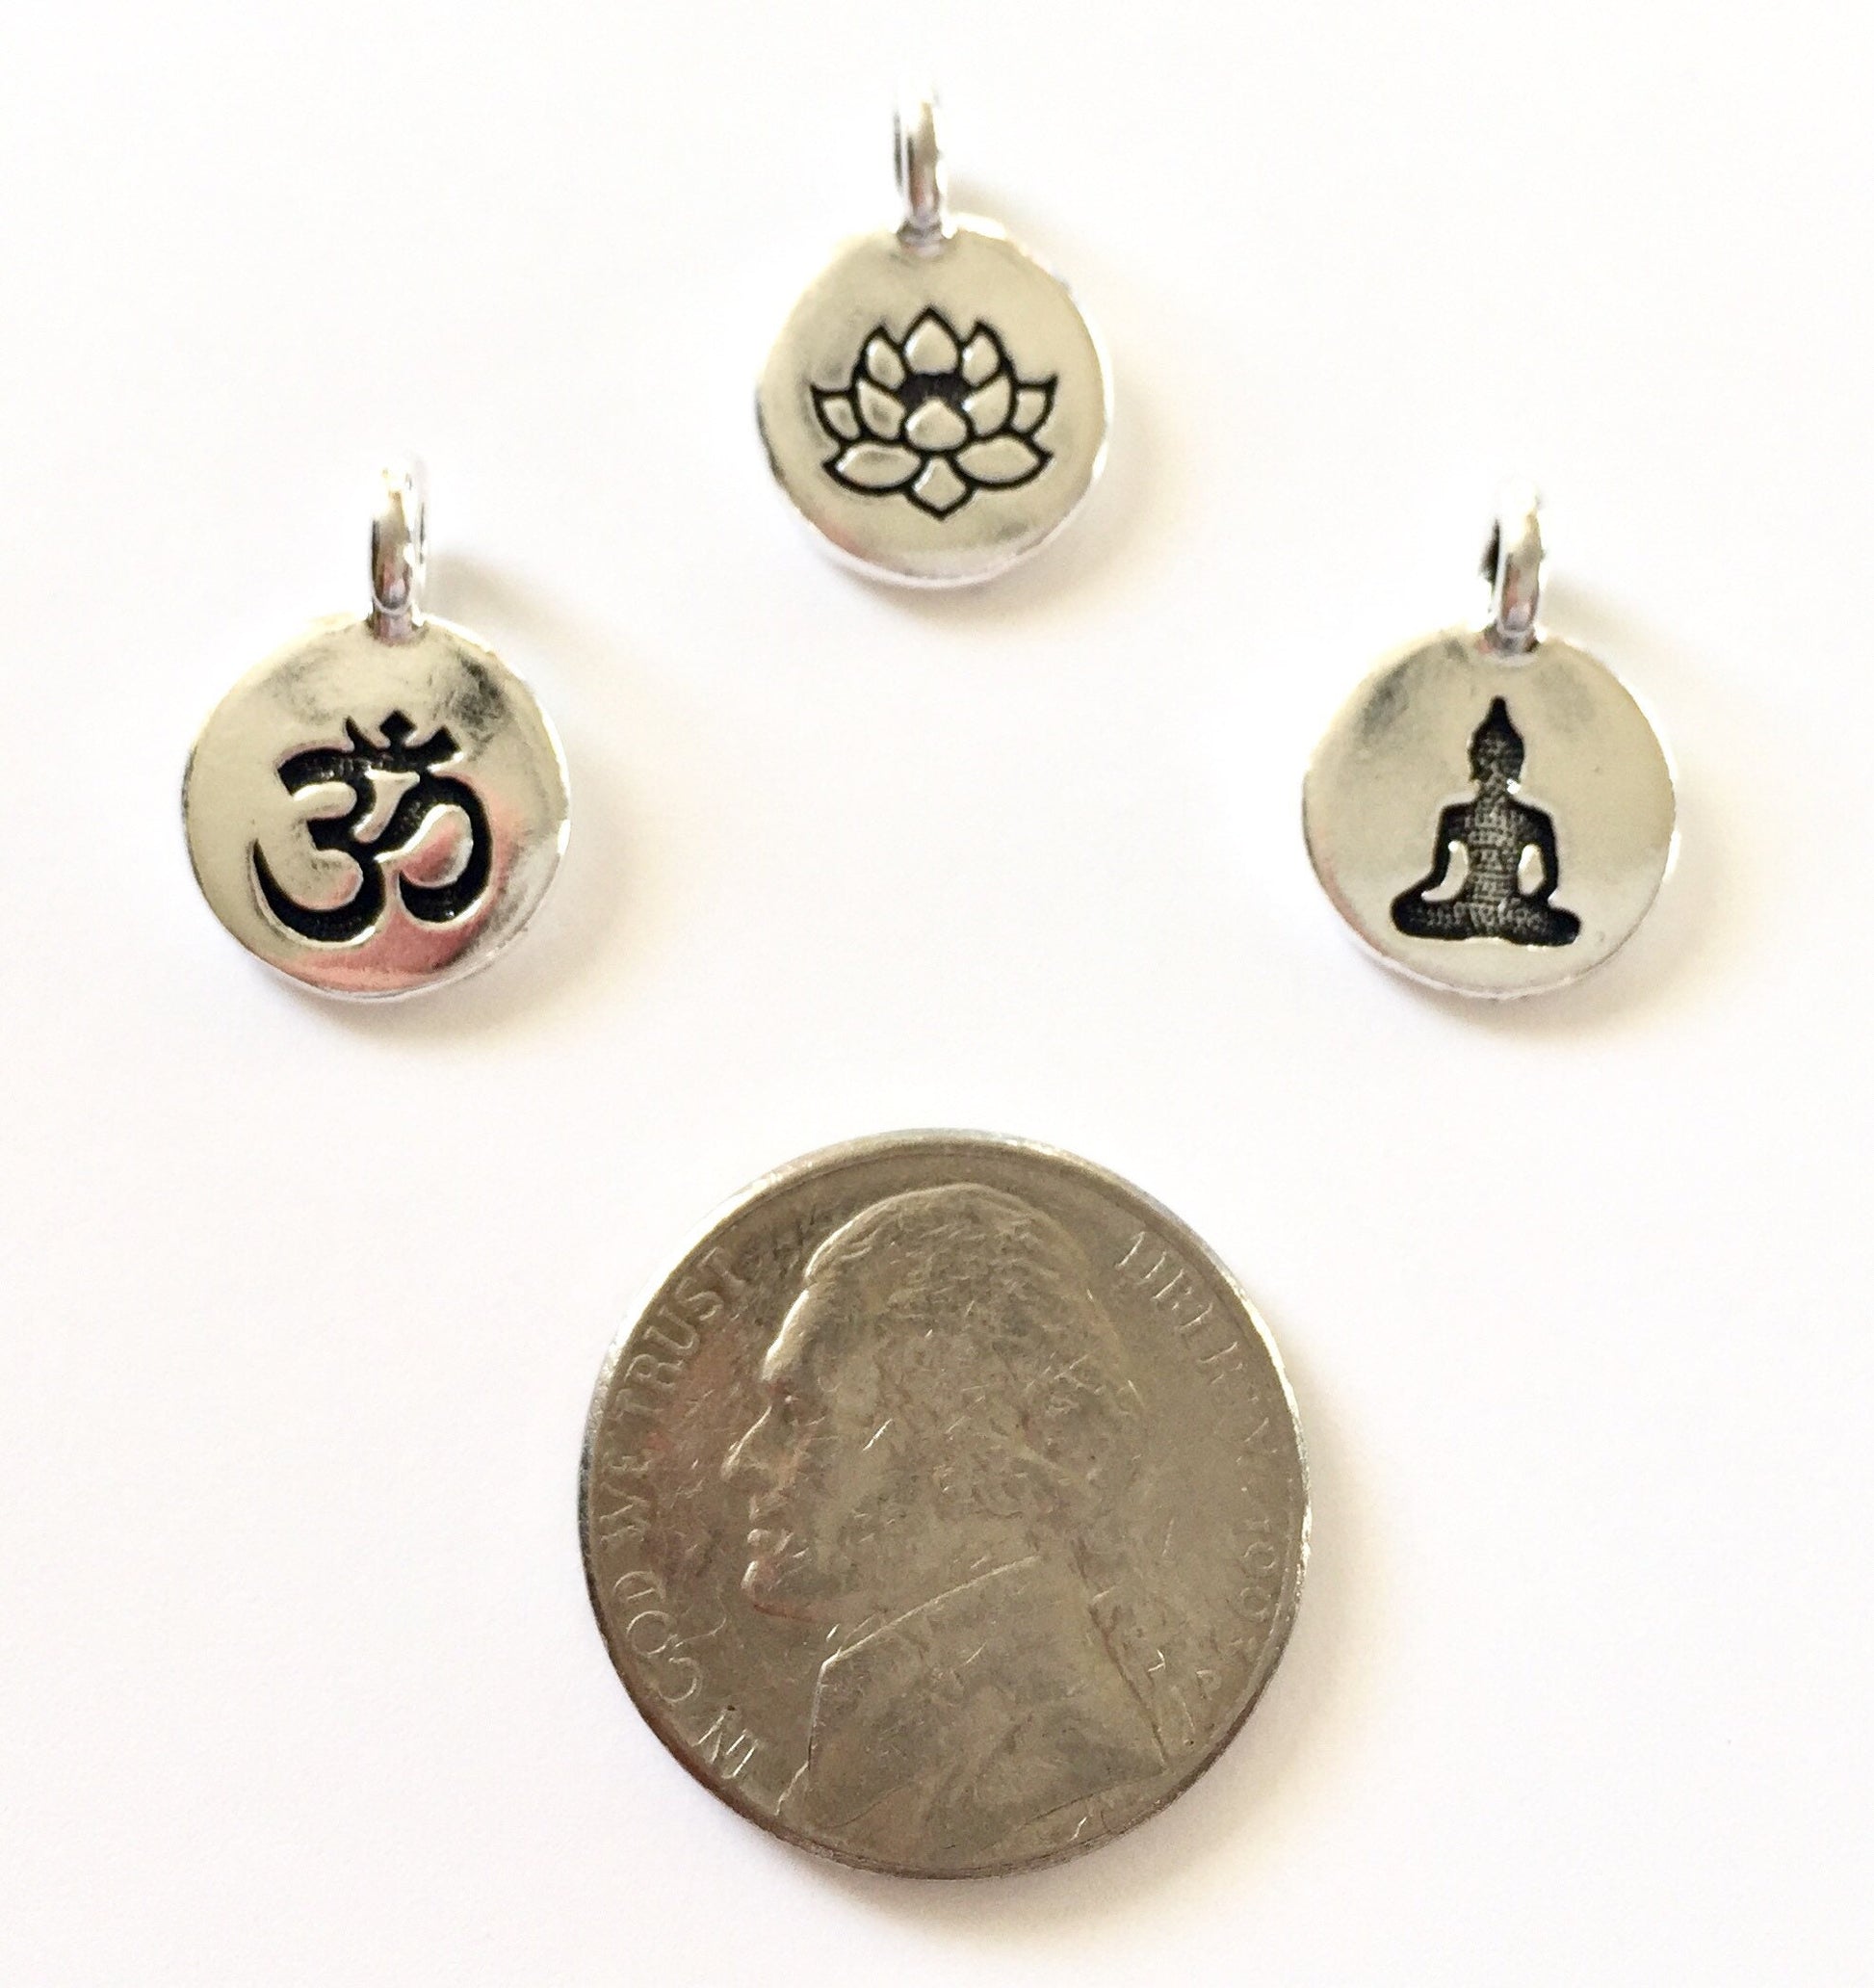 Om, lotus and buddha charms with a nickel for size comparison